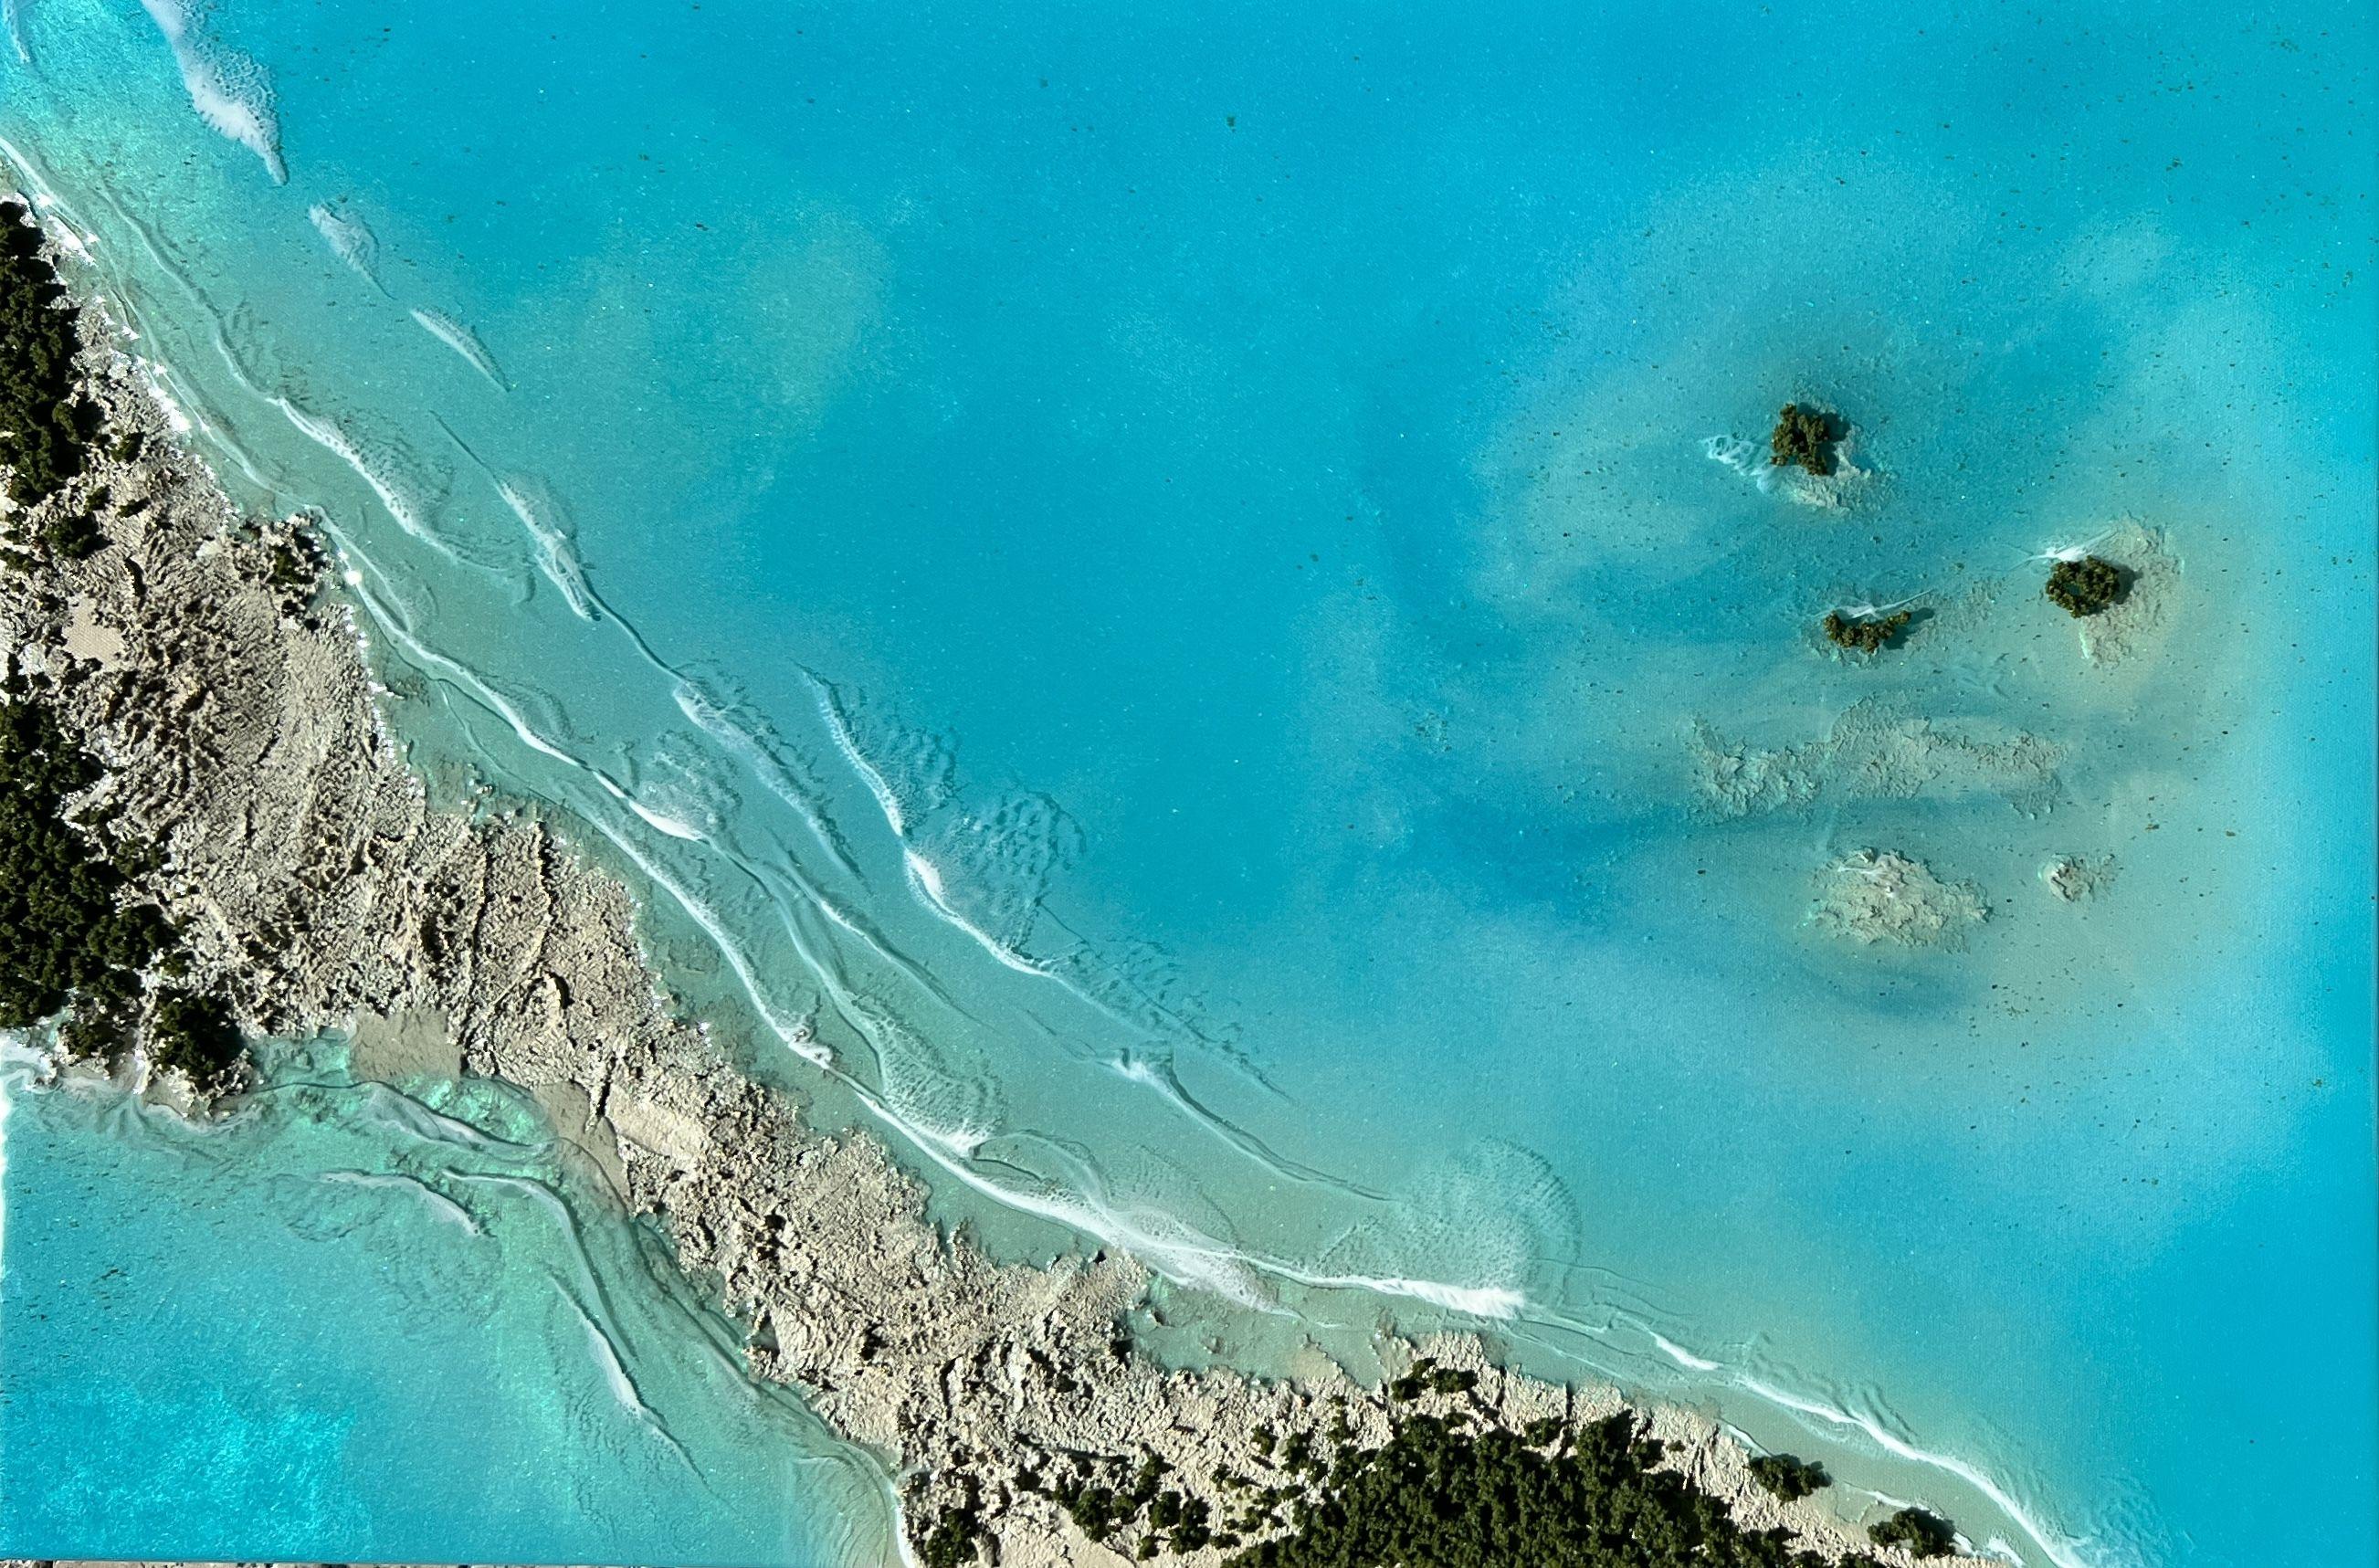 Original Mixed Media seascape painting     Unique ocean painting with white sand beach and frothy splashing waves, inspired by The Turks And Caicos Islands    Different shades of blue, green, turquoise, teal, aqua, copper and gold  This painting